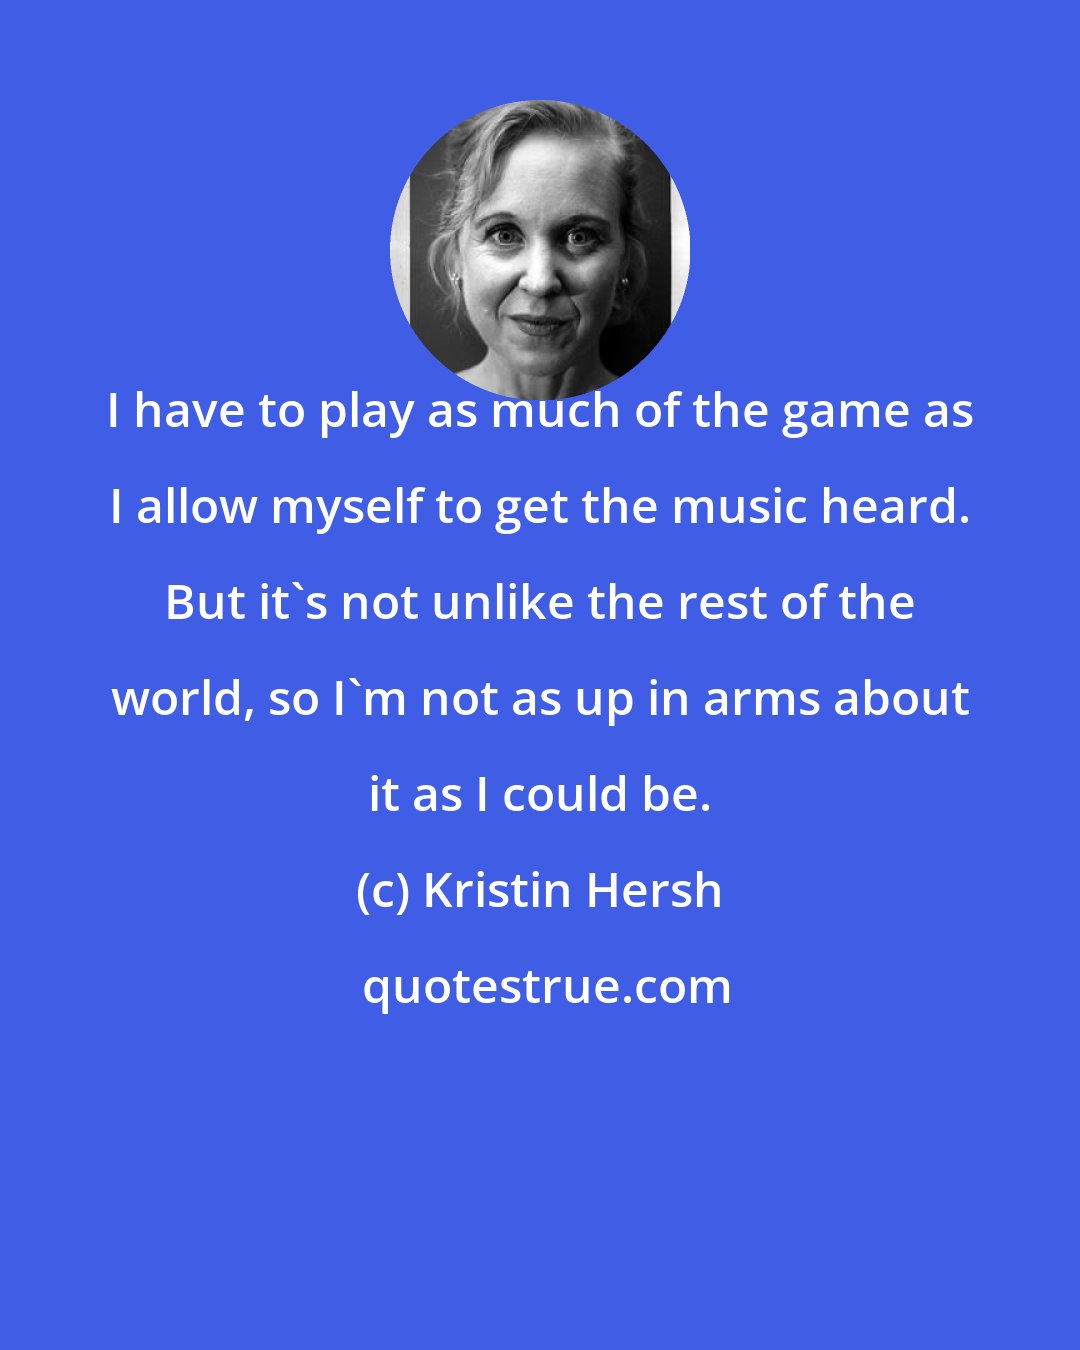 Kristin Hersh: I have to play as much of the game as I allow myself to get the music heard. But it's not unlike the rest of the world, so I'm not as up in arms about it as I could be.